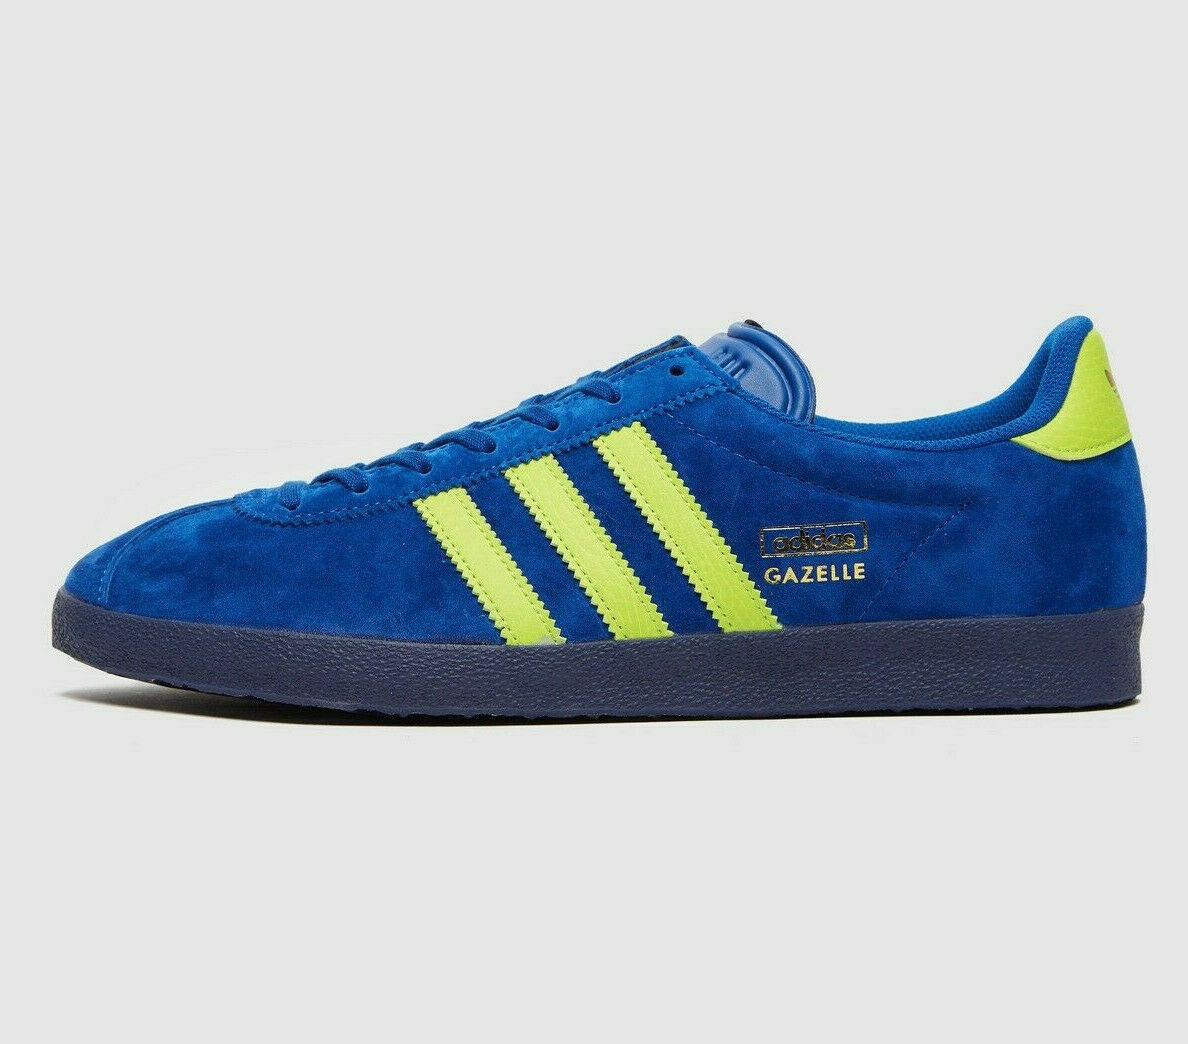 adidas Originals Gazelle Vintage Trainers in Blue and Yellow Suede Shoes